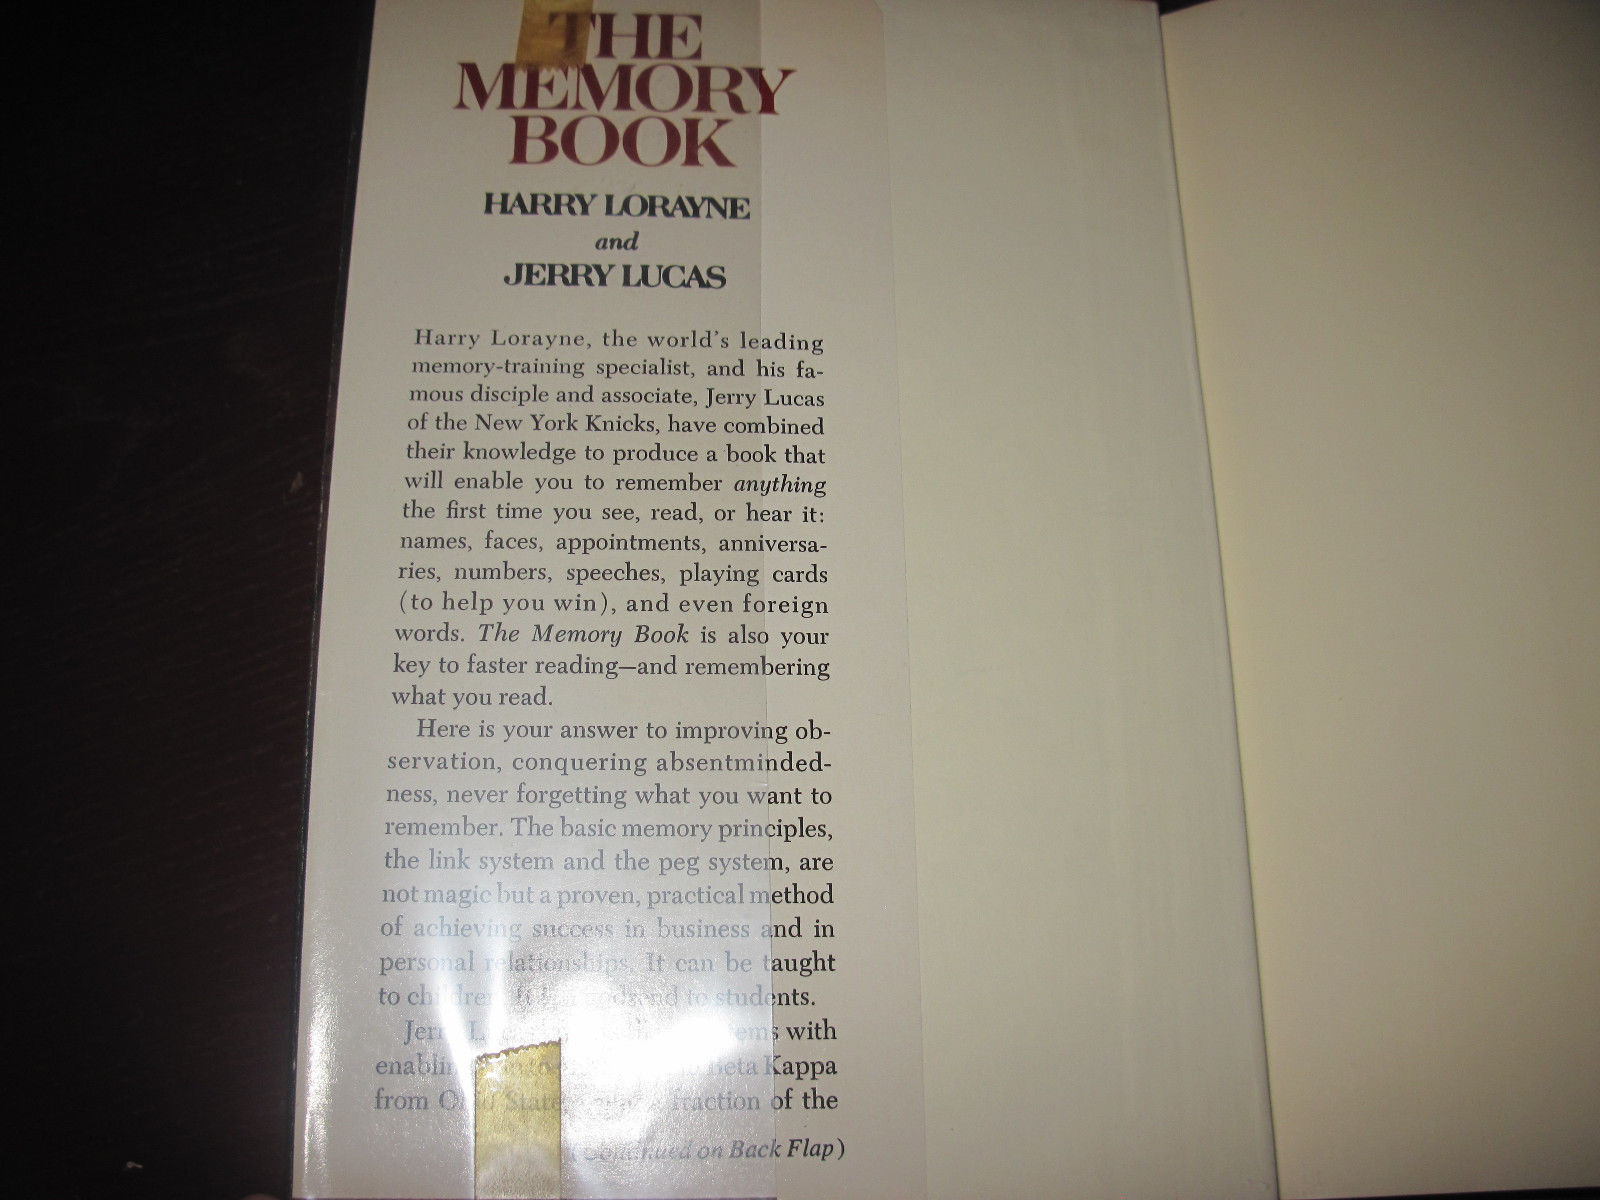 the memory book by harry lorayne pdf free download